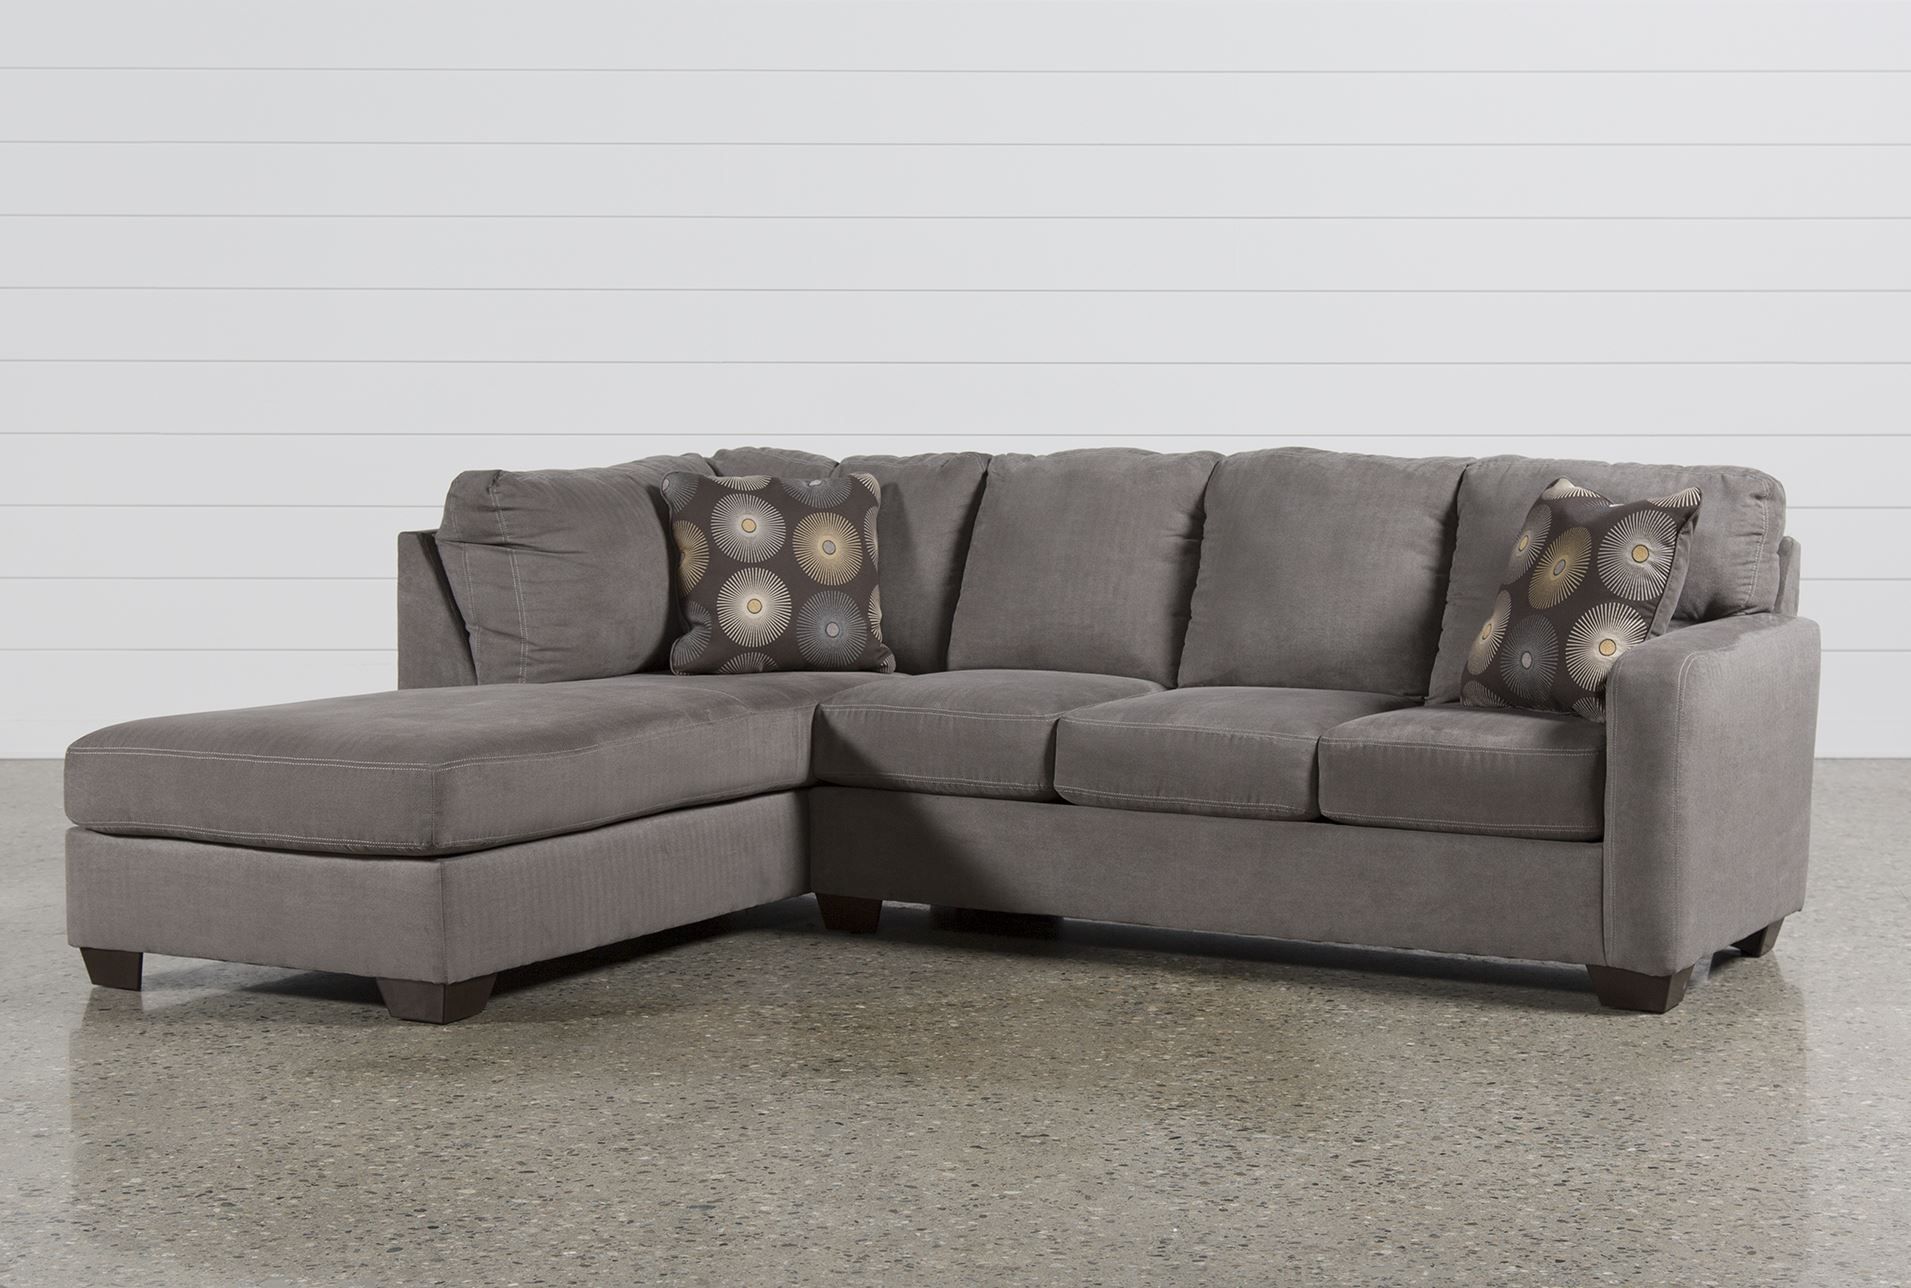 Laf Chaise Sectional Sofa | Baci Living Room Inside Malbry Point 3 Piece Sectionals With Raf Chaise (View 4 of 25)